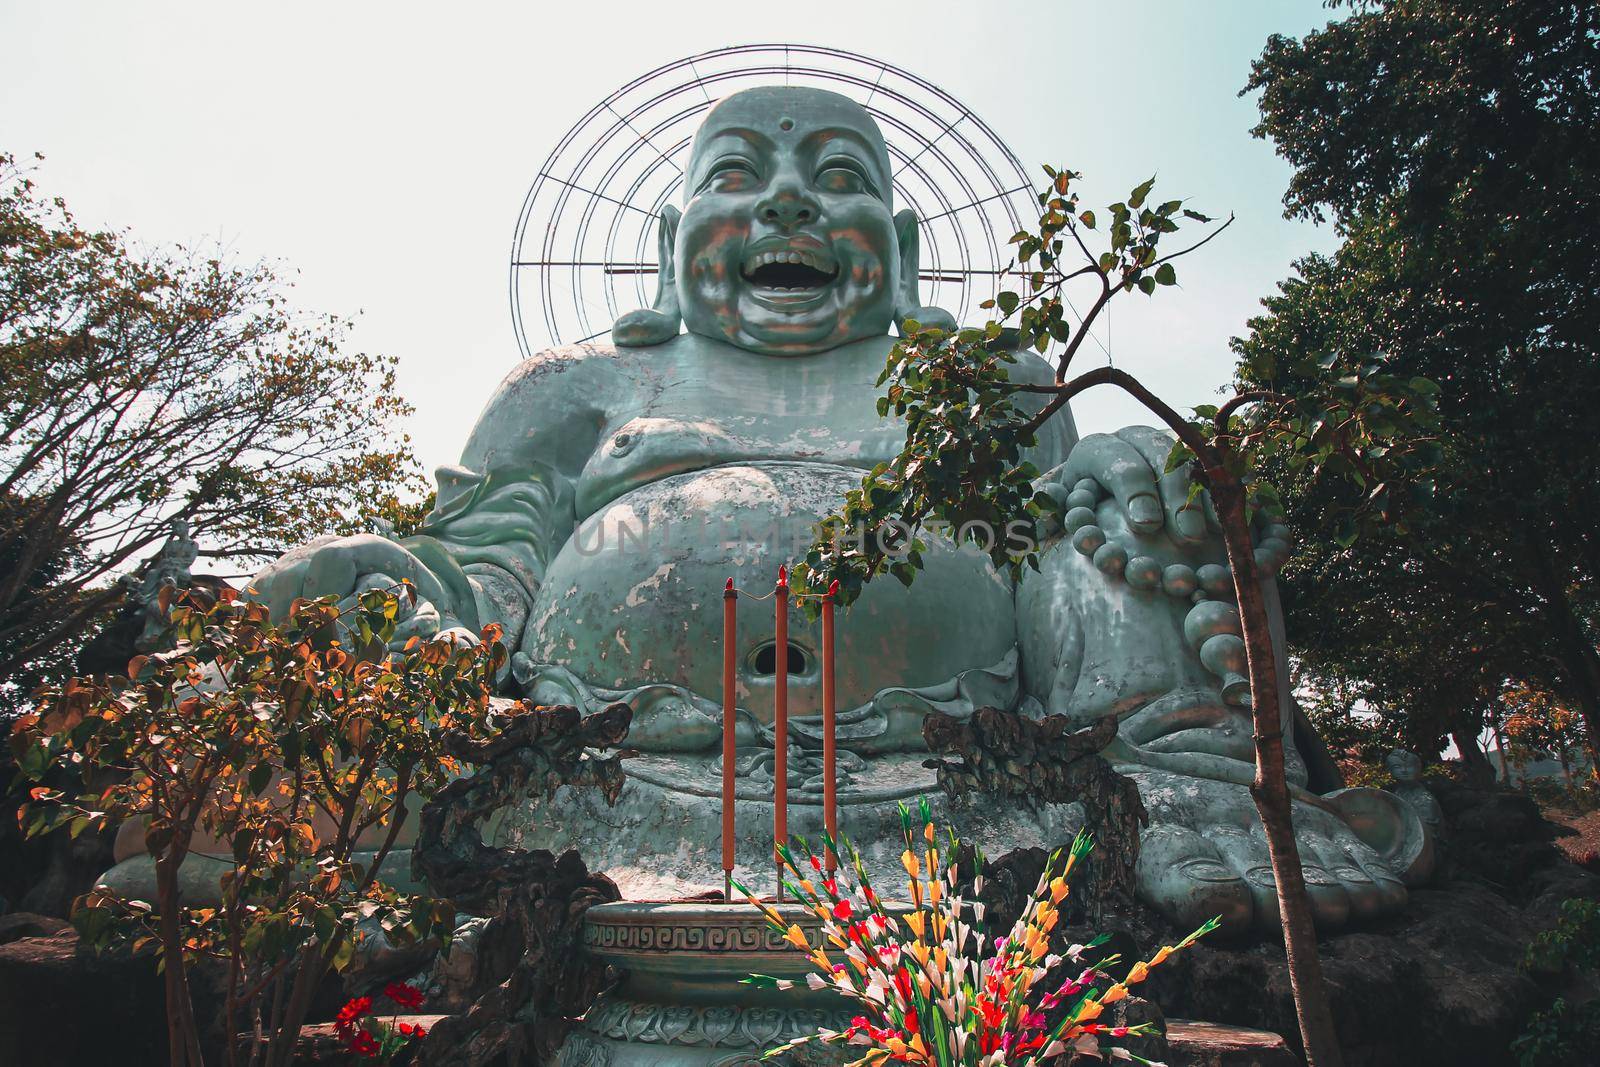 Smiling Buddha Statue in Linh An Pagoda in Da lat, Vietnam by Sonnet15